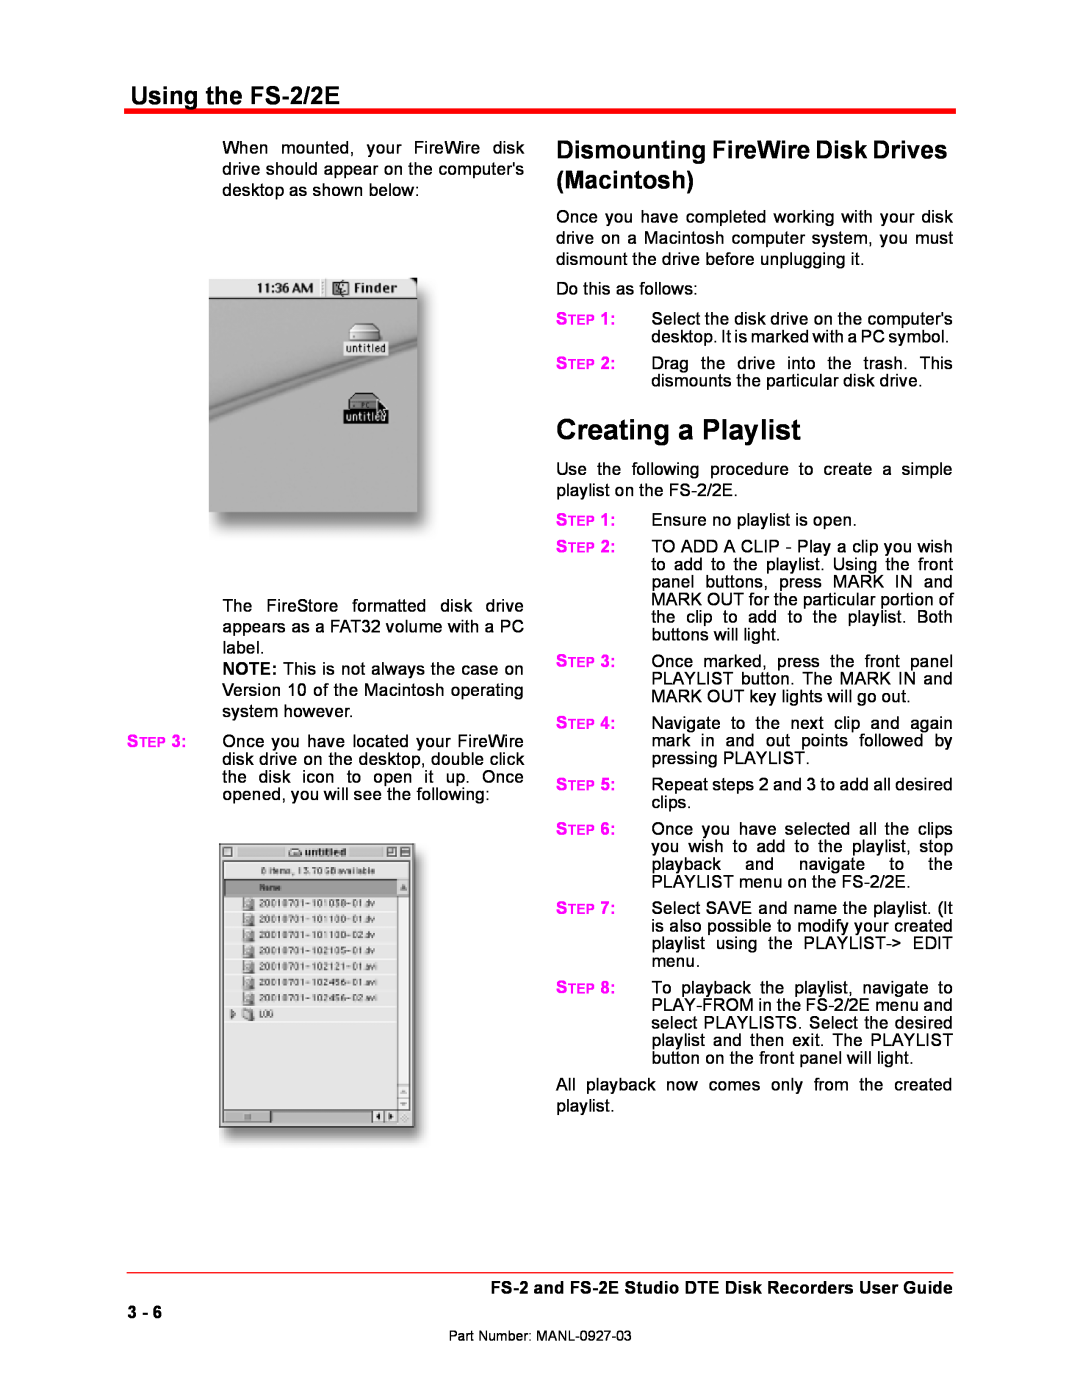 FOCUS Enhancements manual Creating a Playlist, Dismounting FireWire Disk Drives Macintosh, Using the FS-2/2E 